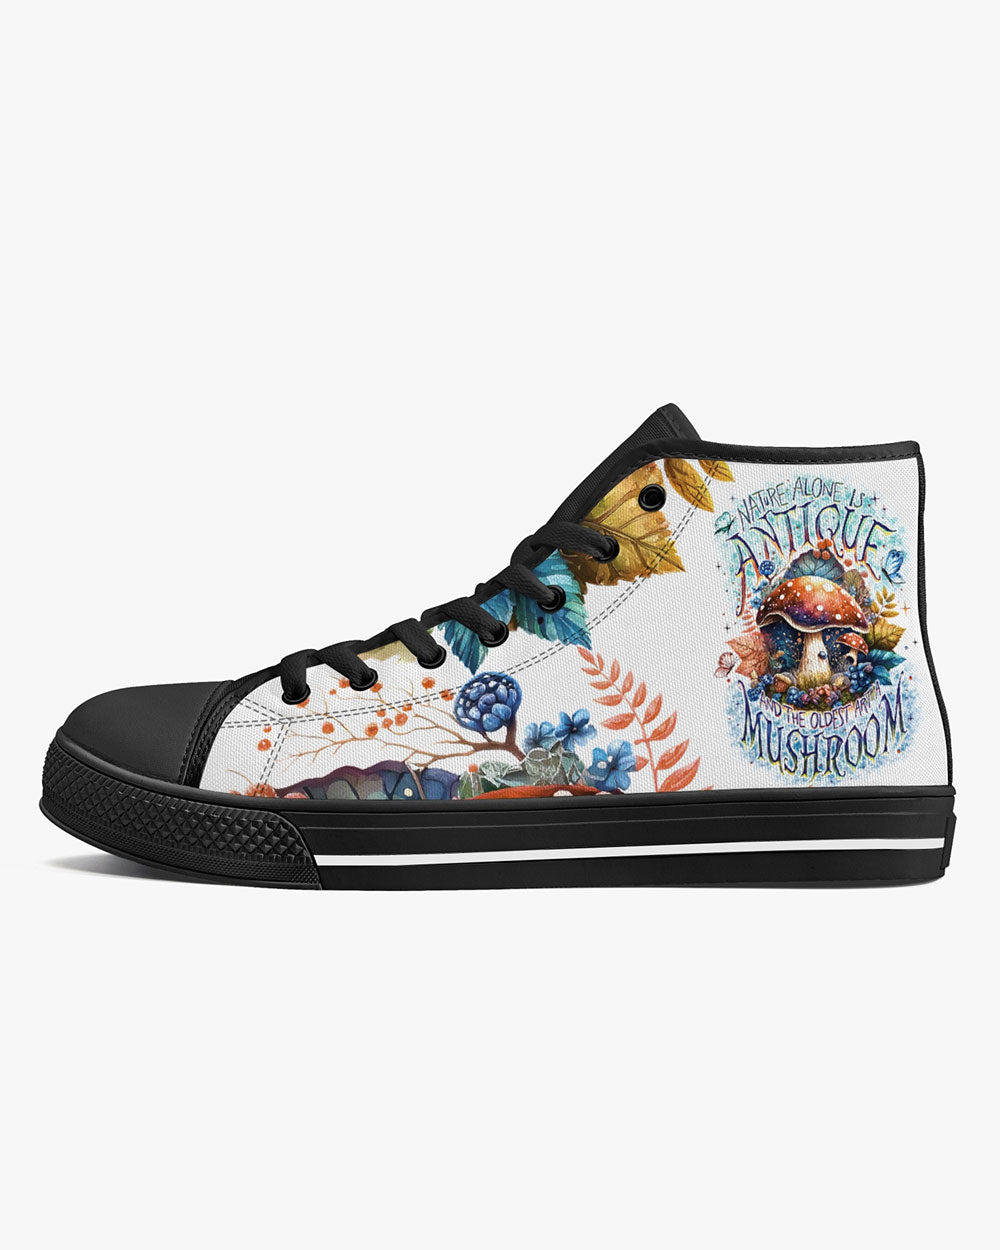 THE OLDEST ART A MUSHROOM HIGH TOP CANVAS SHOES - TY2804233